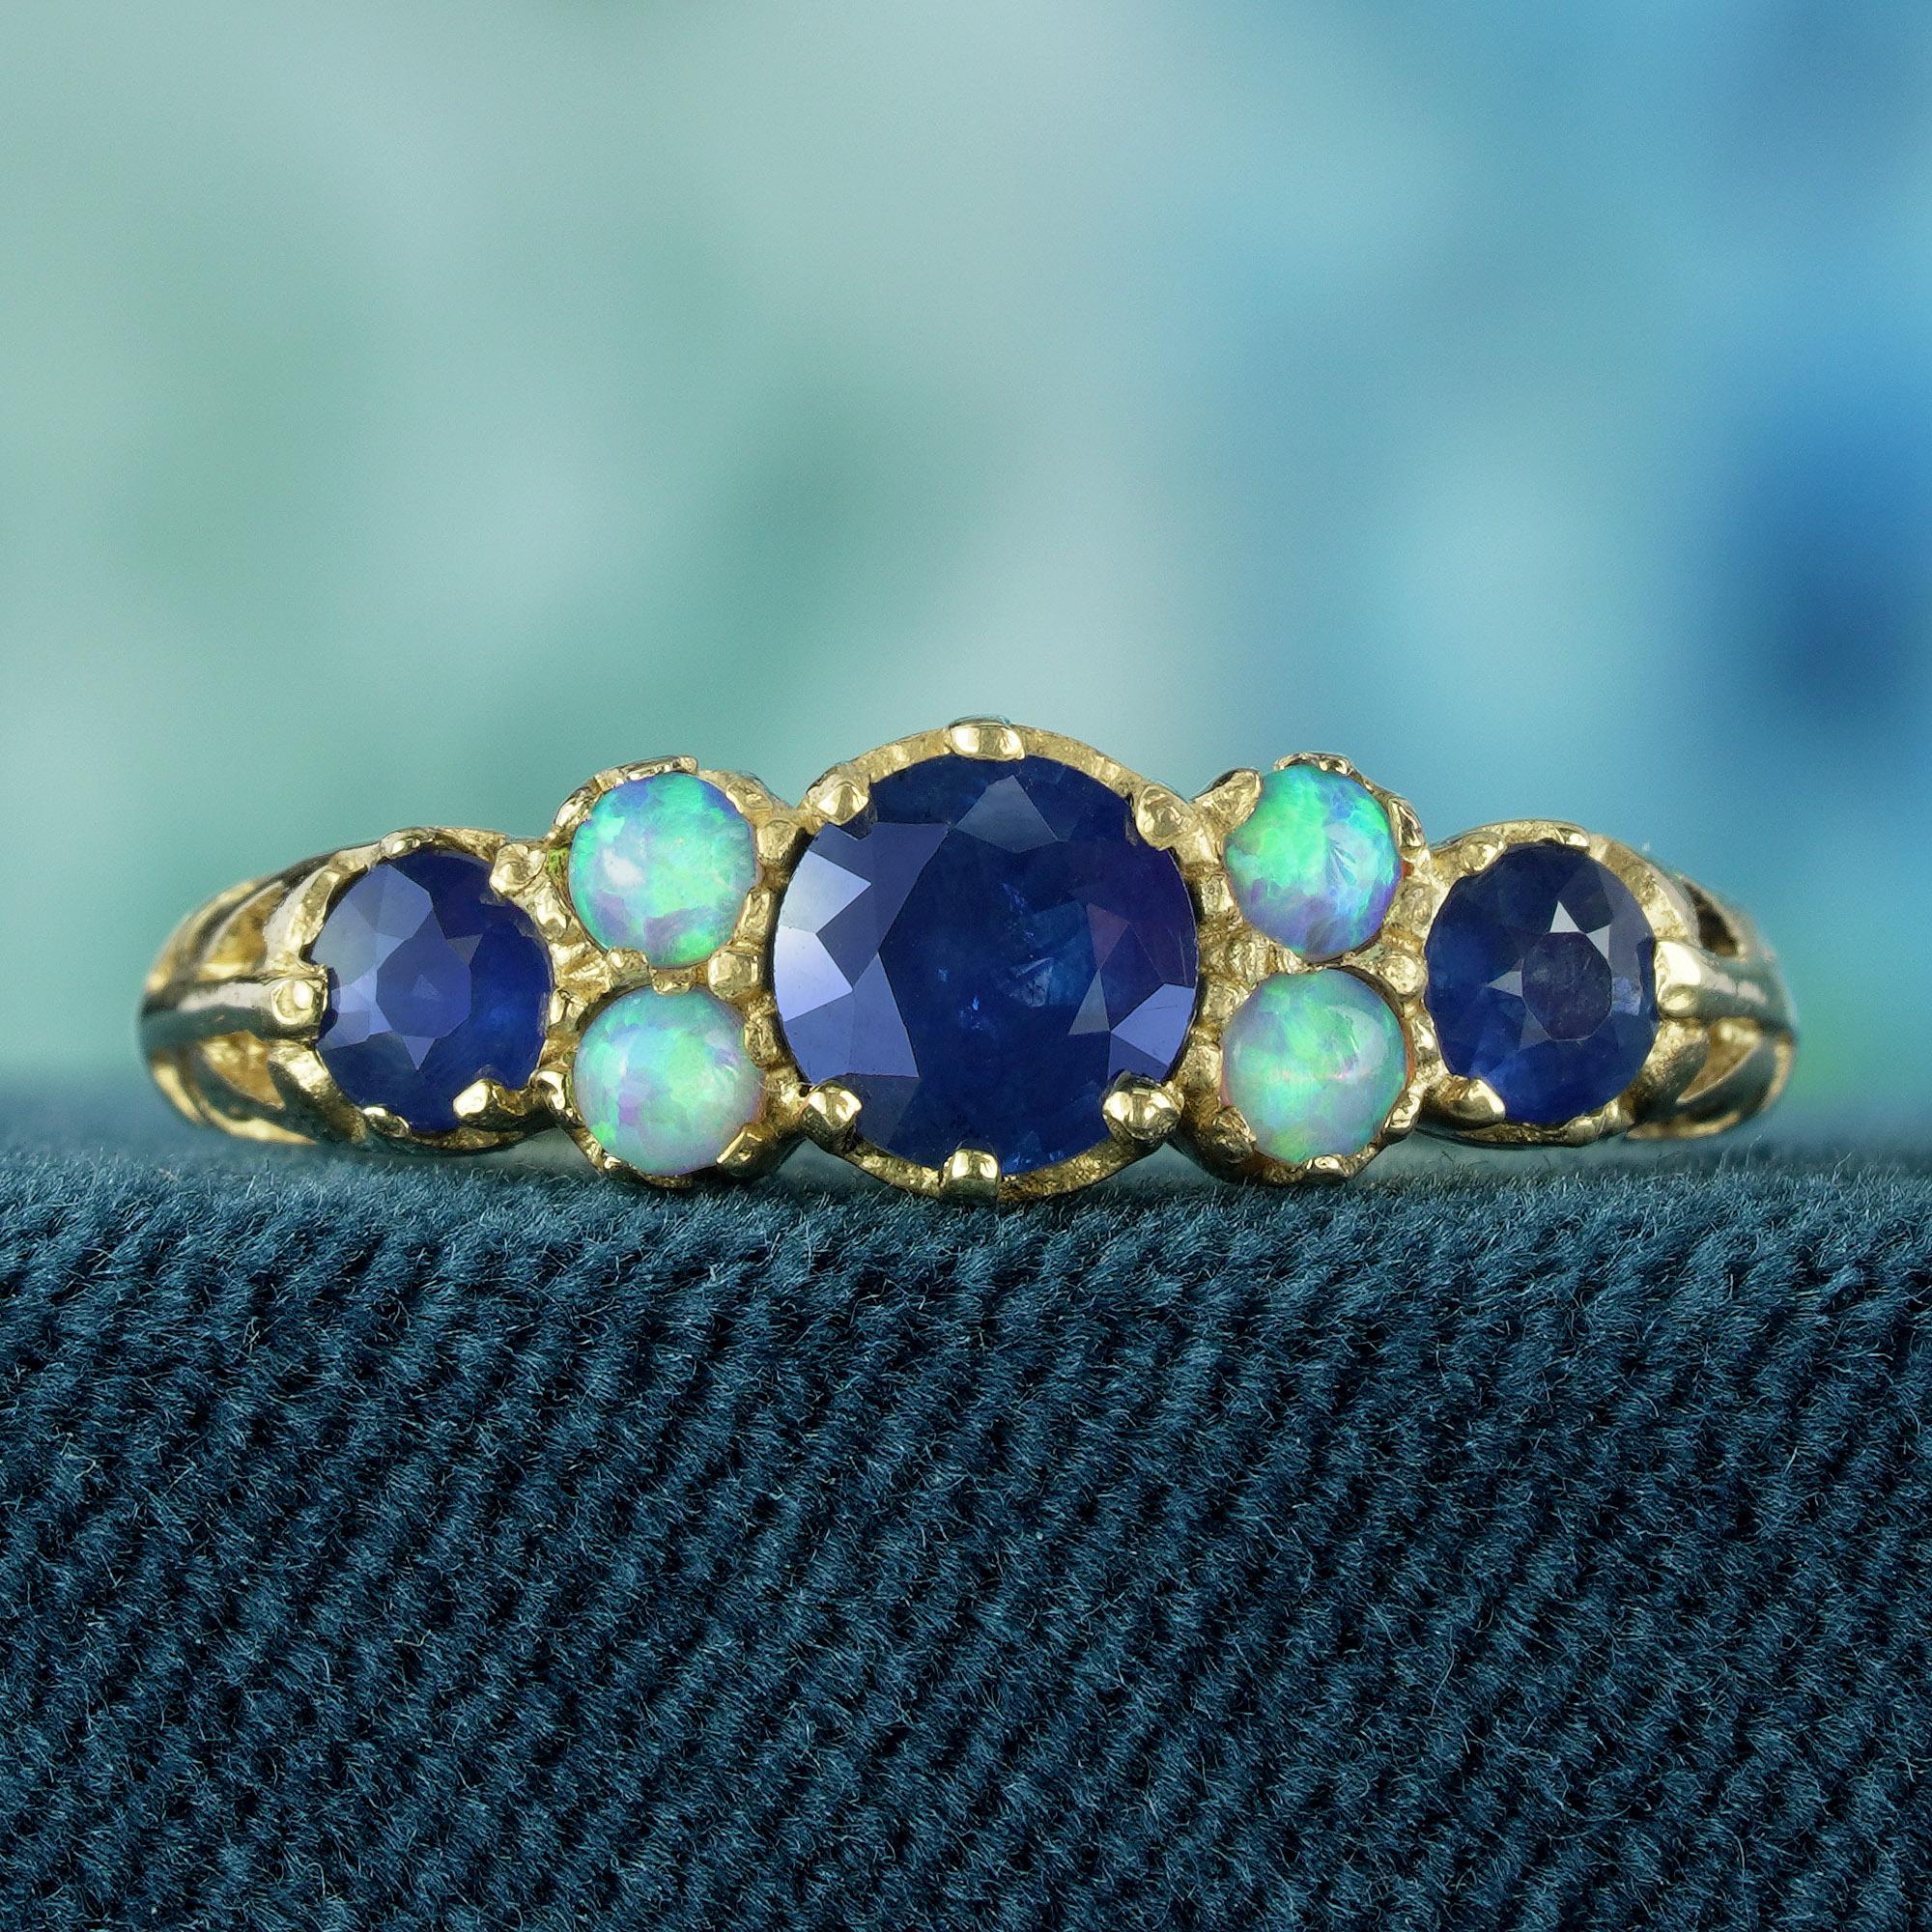 At the center of attention are three mesmerizing natural blue sapphires, each boasting a round faceted cut that guarantees captivating brilliance, making your hand the focal point of any attention. Delicate white opal accents gracefully flank